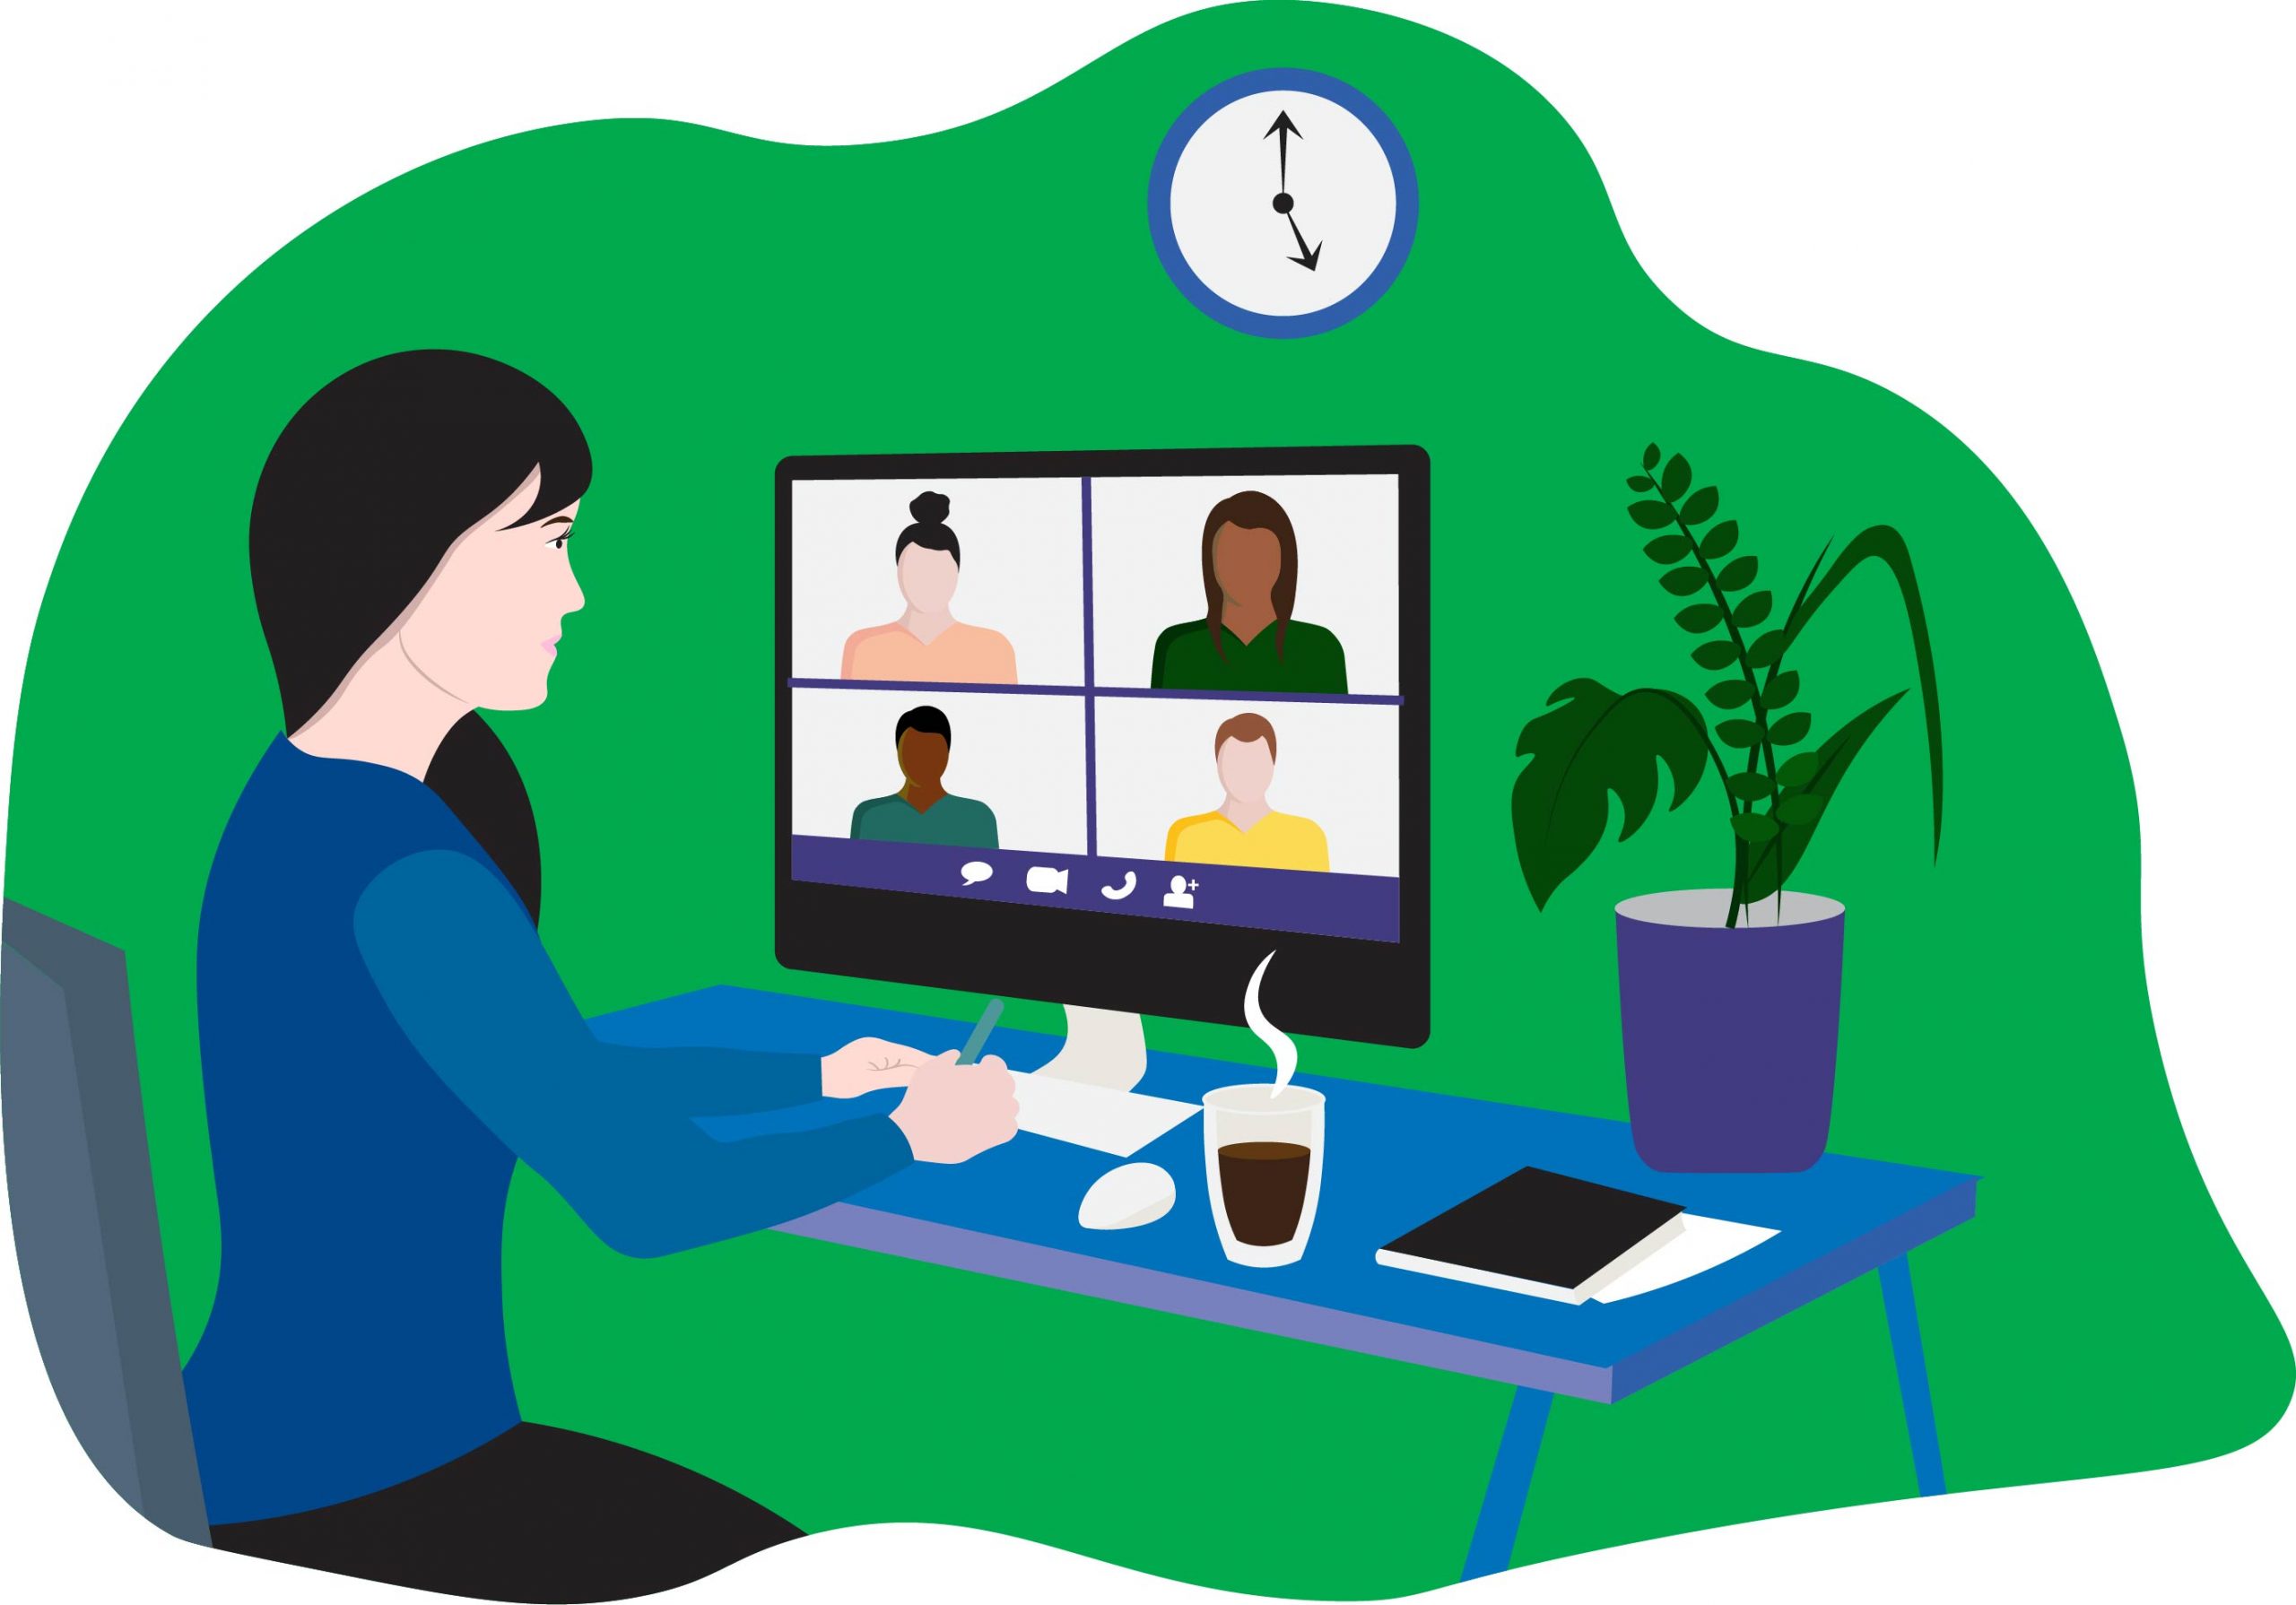 Green background with person attending an online meeting